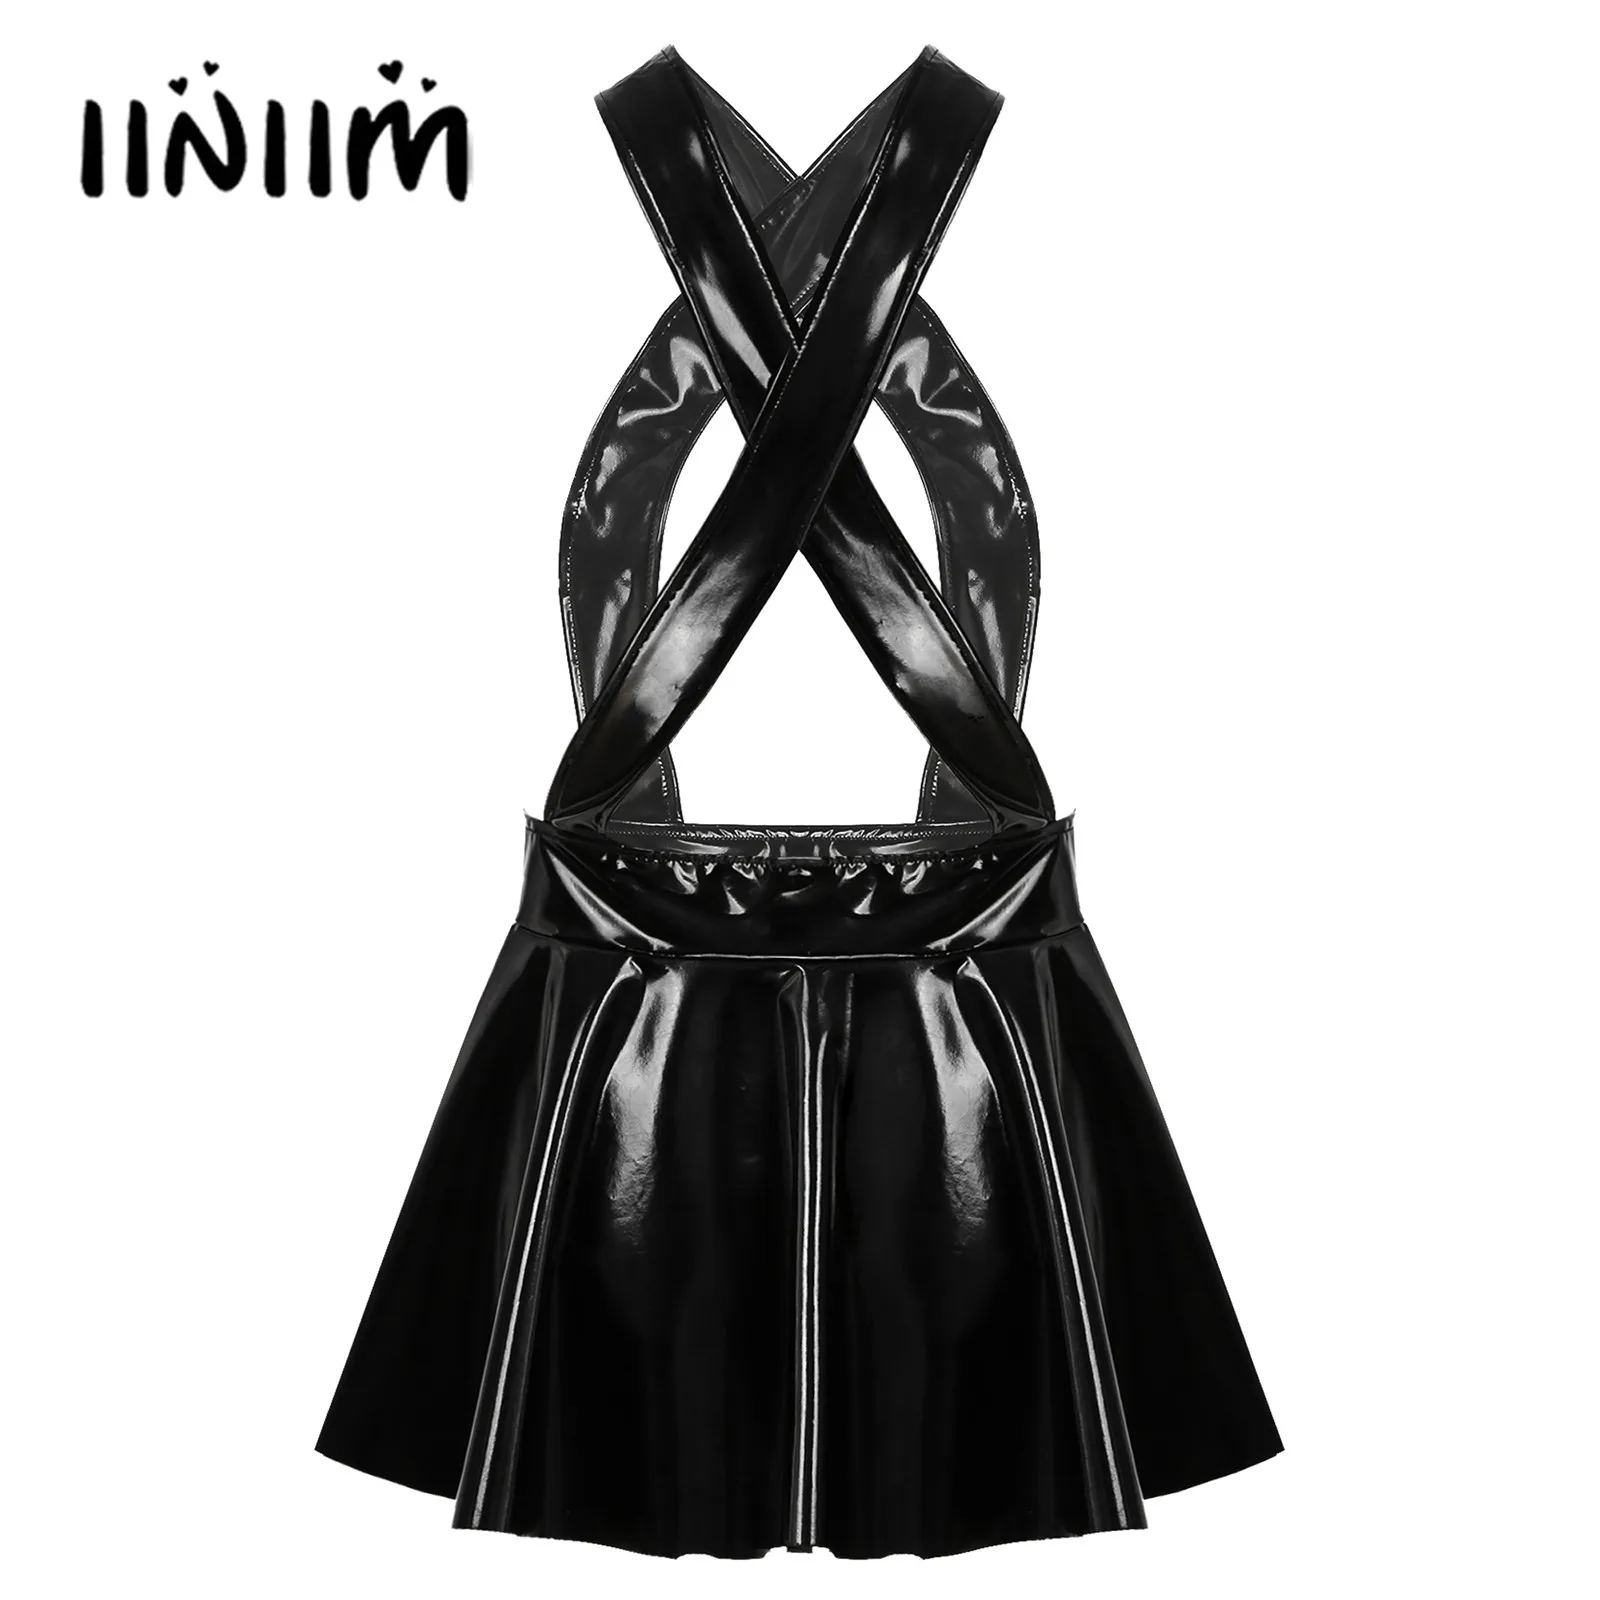 

Black Sexy Womens Patent Leather Flare Miniskirt Suspenders Skirt Rave Clubwwear Crisscross Invisible Zipper Wet Look Dress